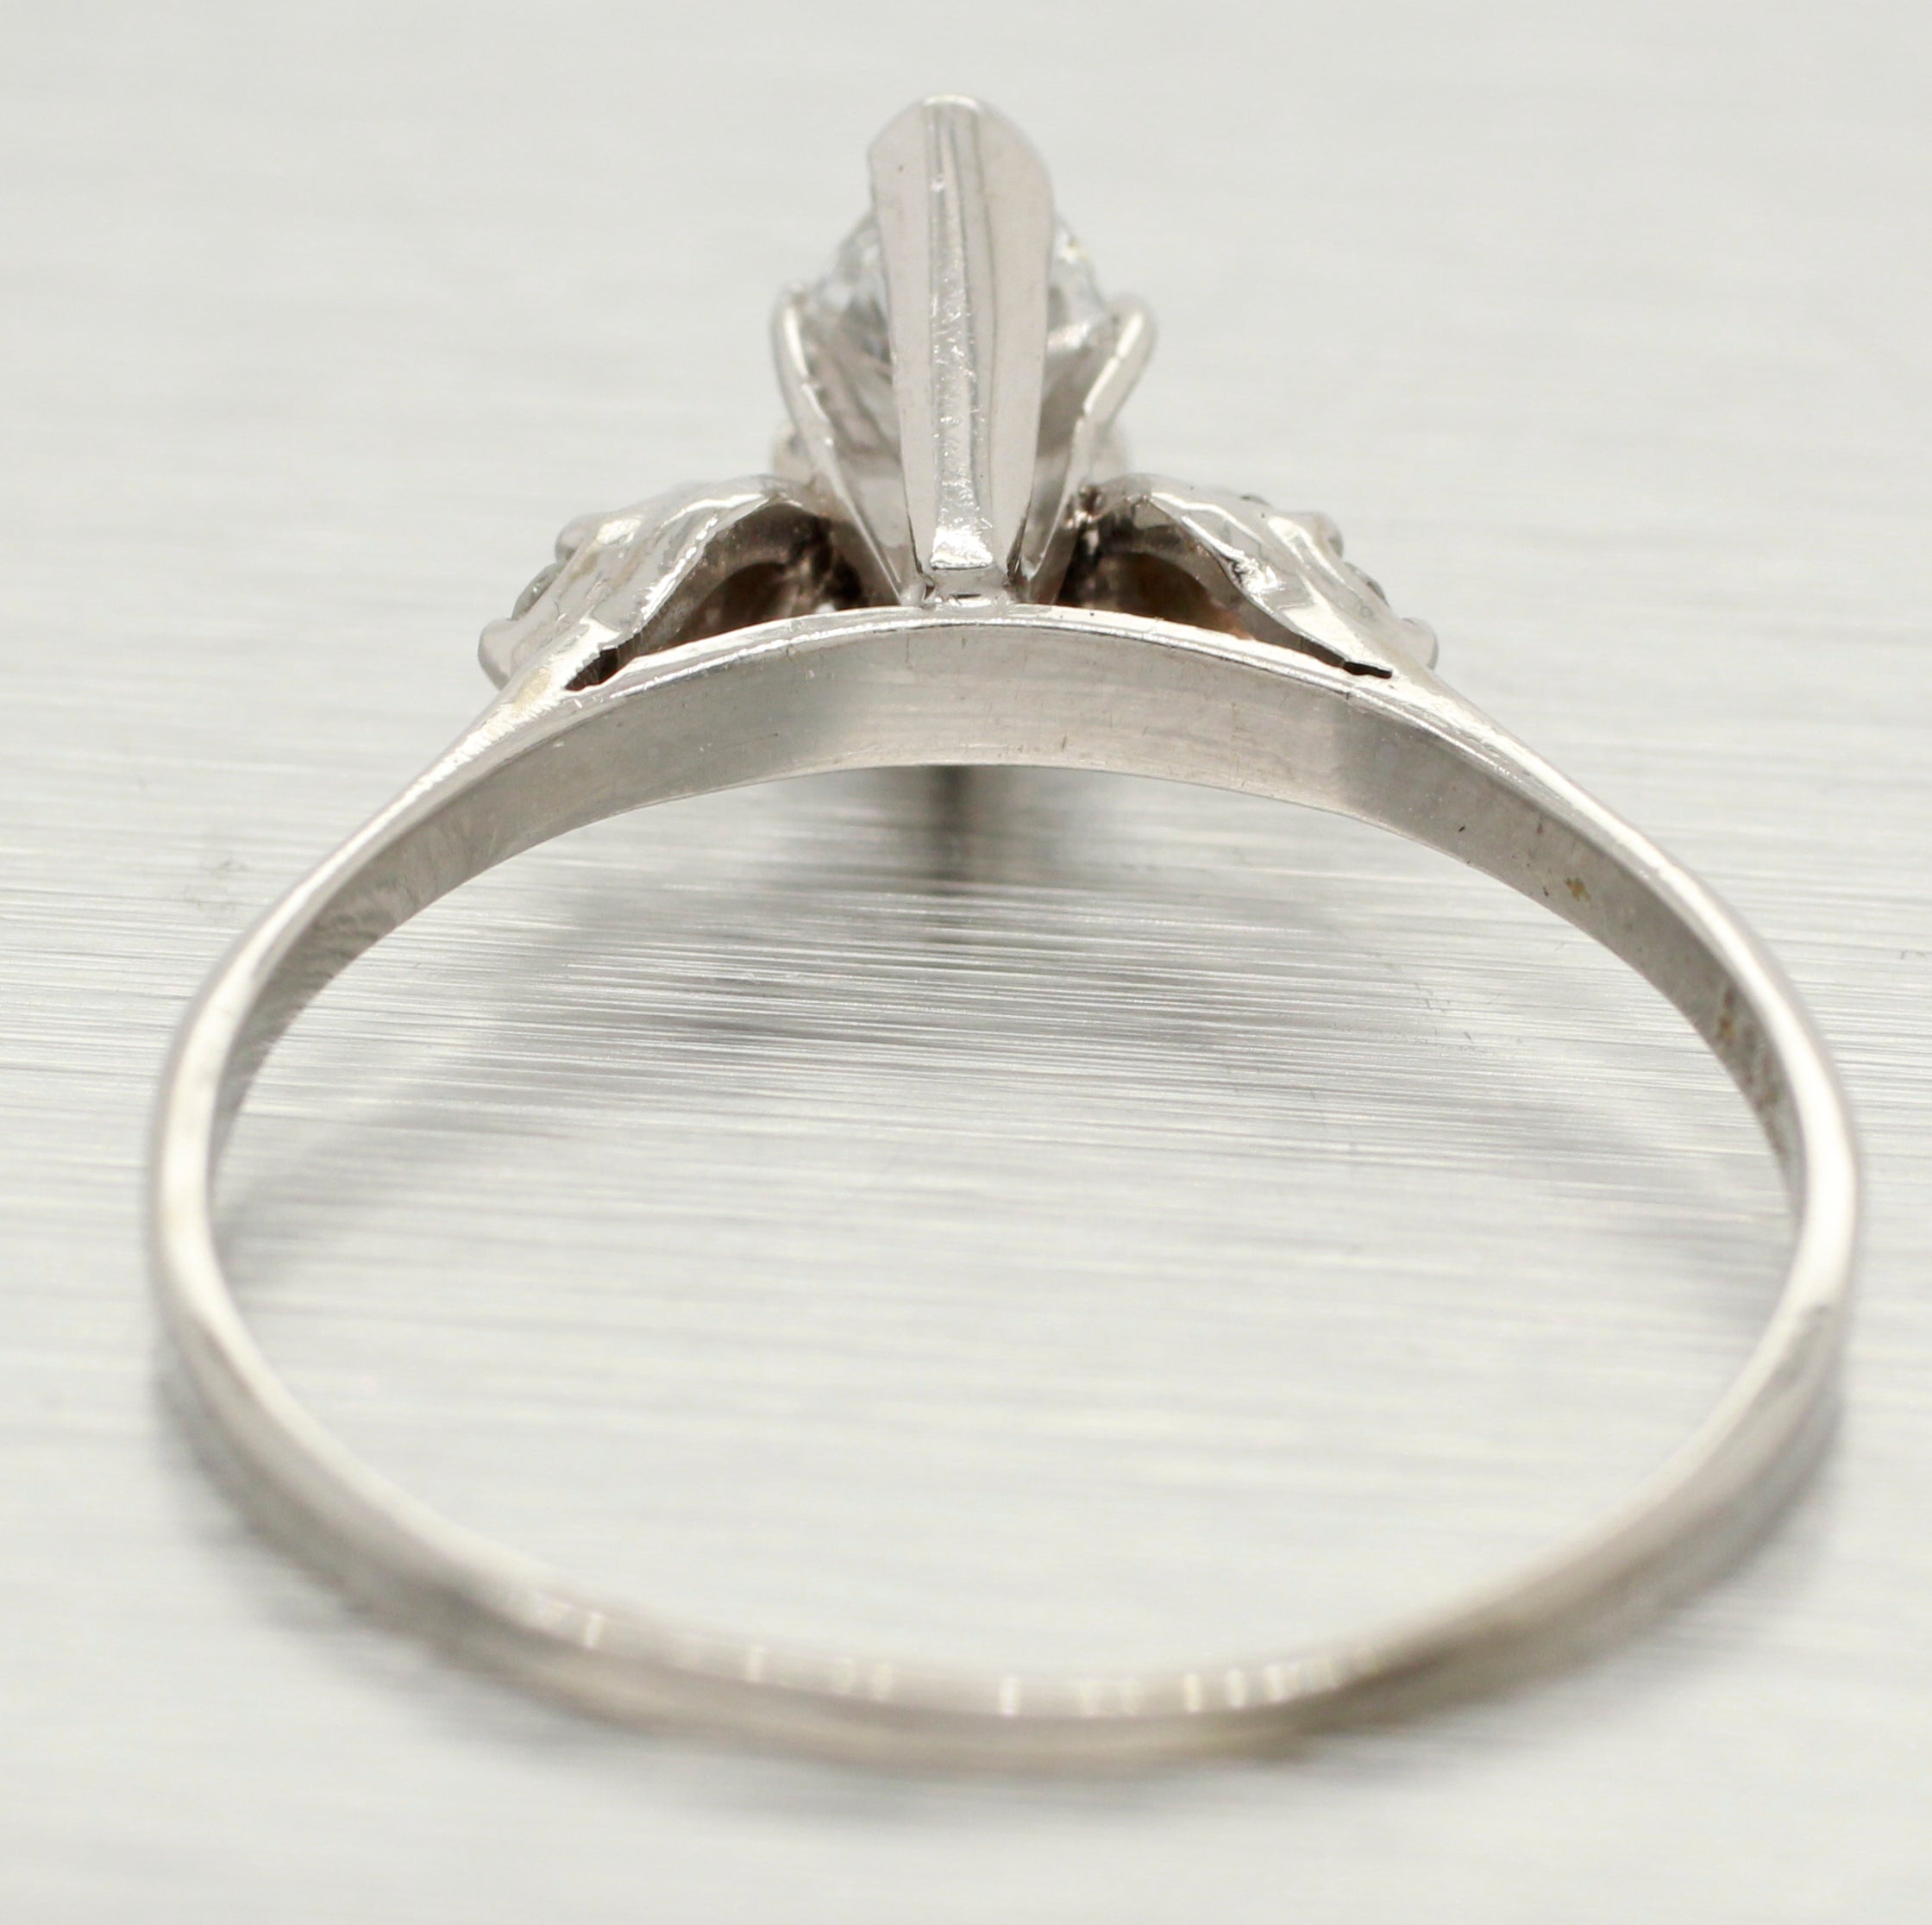 Vintage 0.75ctw Marquise Diamond Engagement Ring in 14k White Gold | Size 11.75